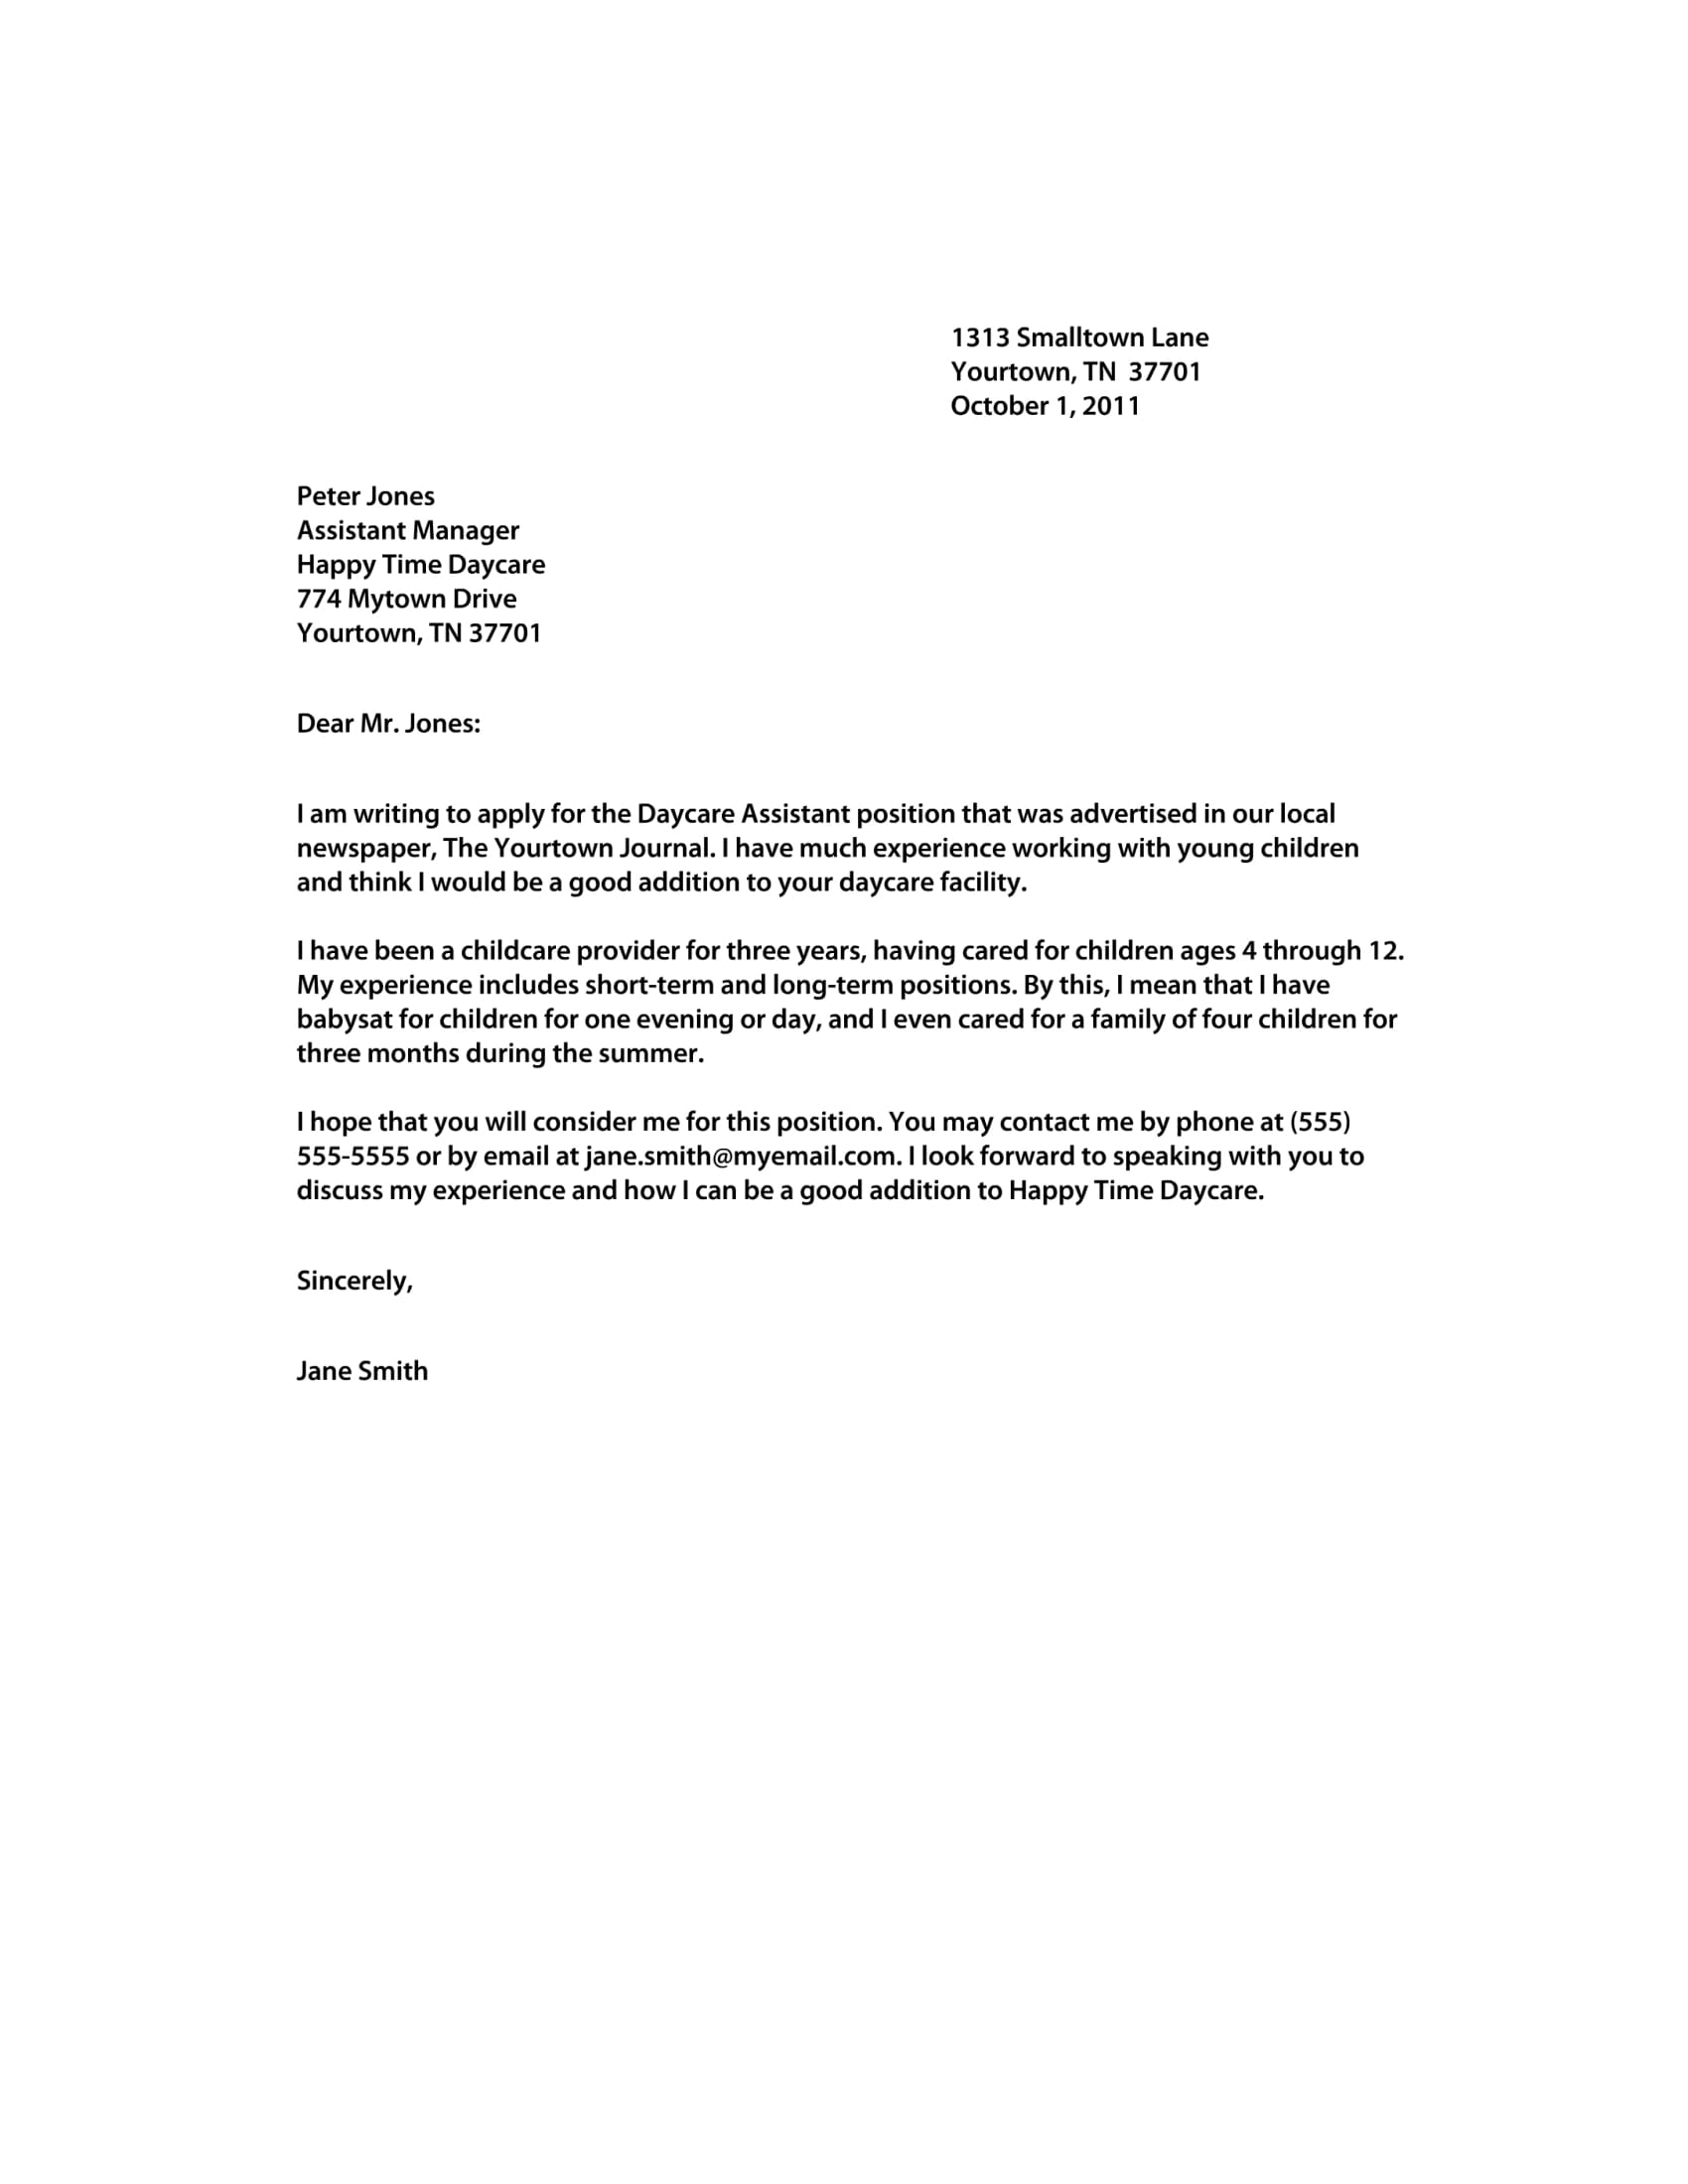 21+ Cover Letter Examples - PDF | Examples